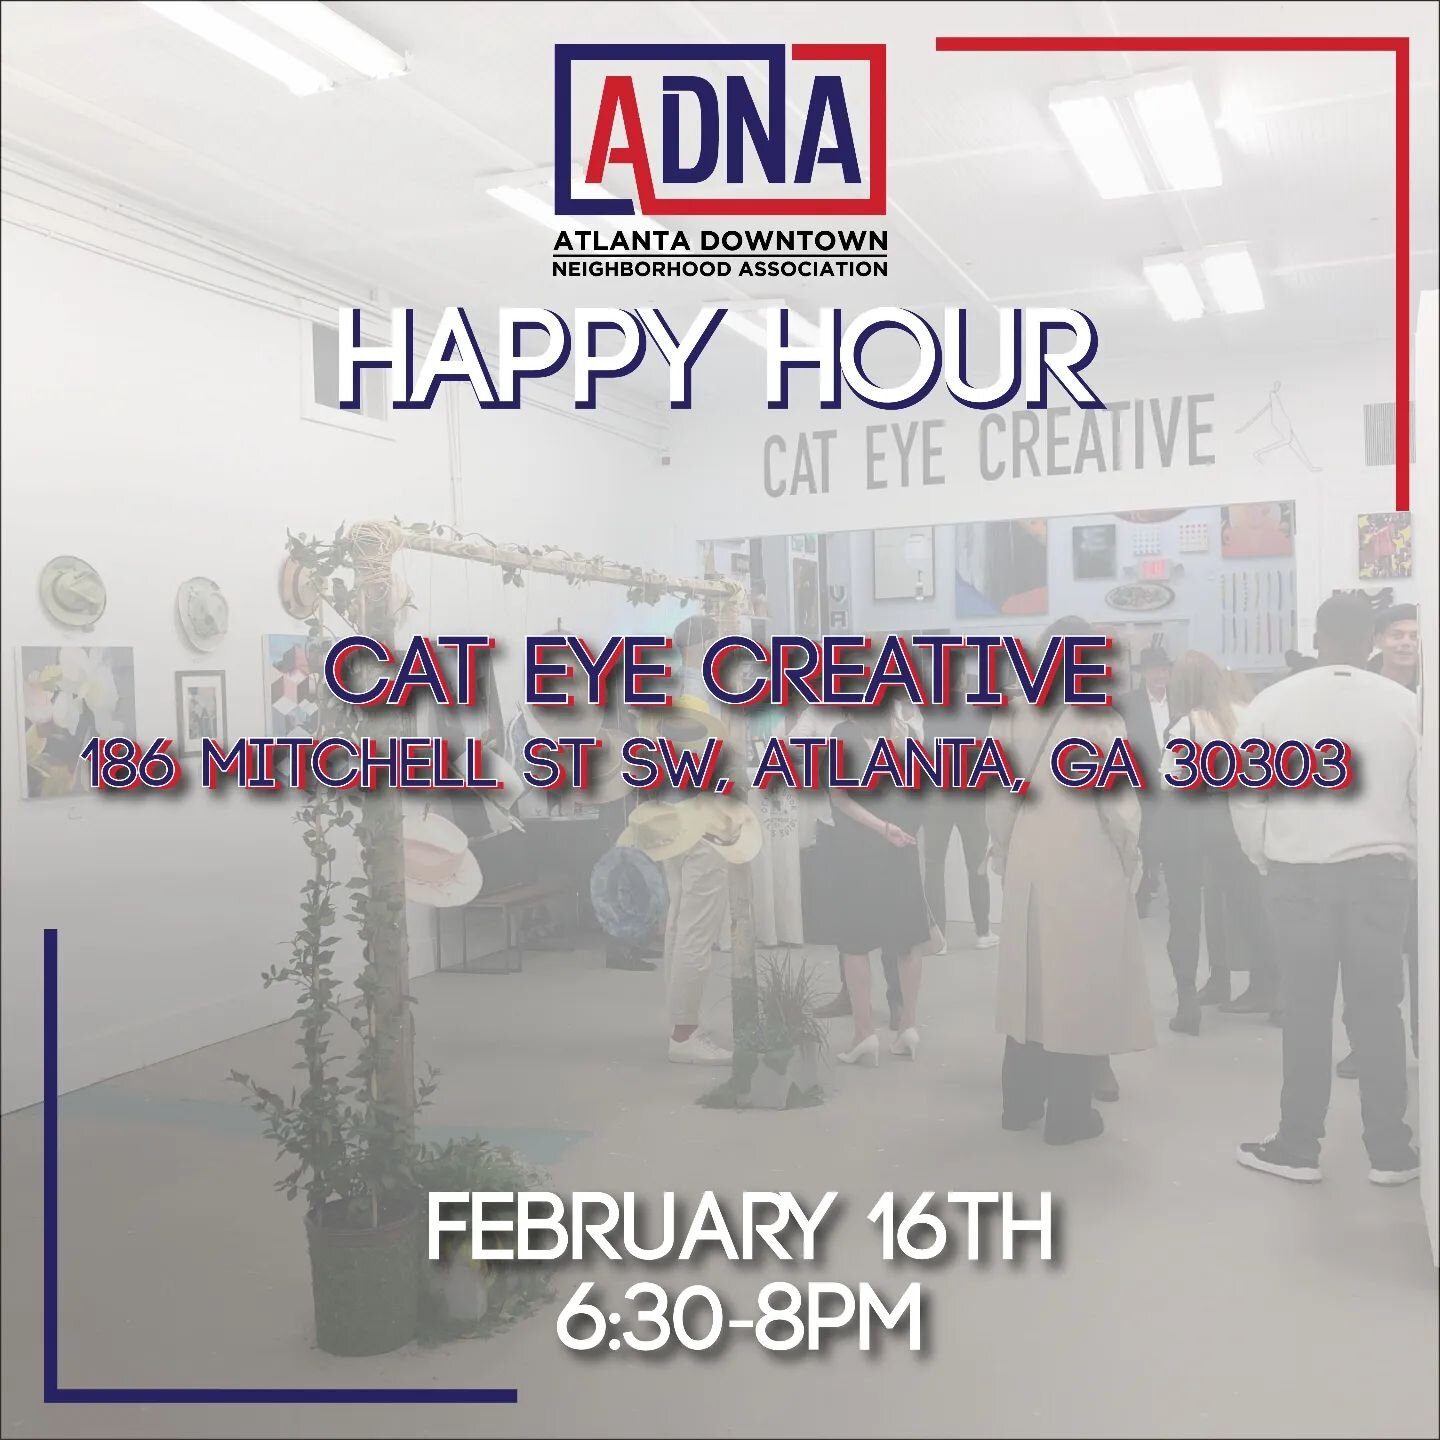 Join us for the first Happy Hour of the year at @cat_eye_creative ! Come see a preview of the upcoming &quot;Utopia&quot; Group Exhibition.

Wine and Bites from @tydetatekitchen provided

RSVP is in bio link